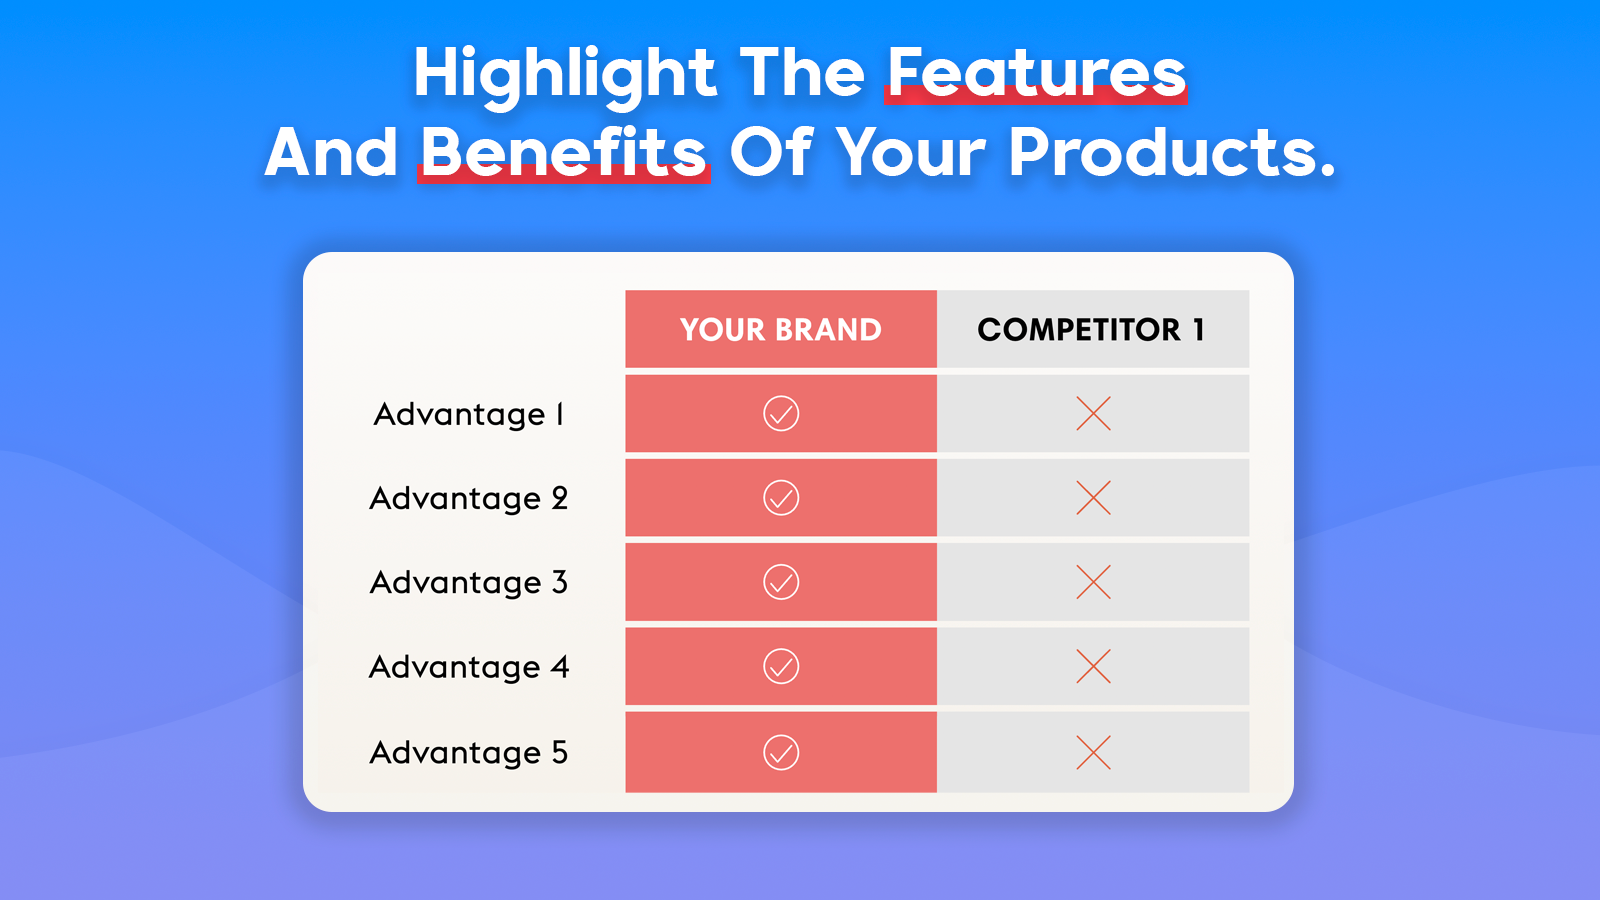 Highlight the features and benefits of your products.